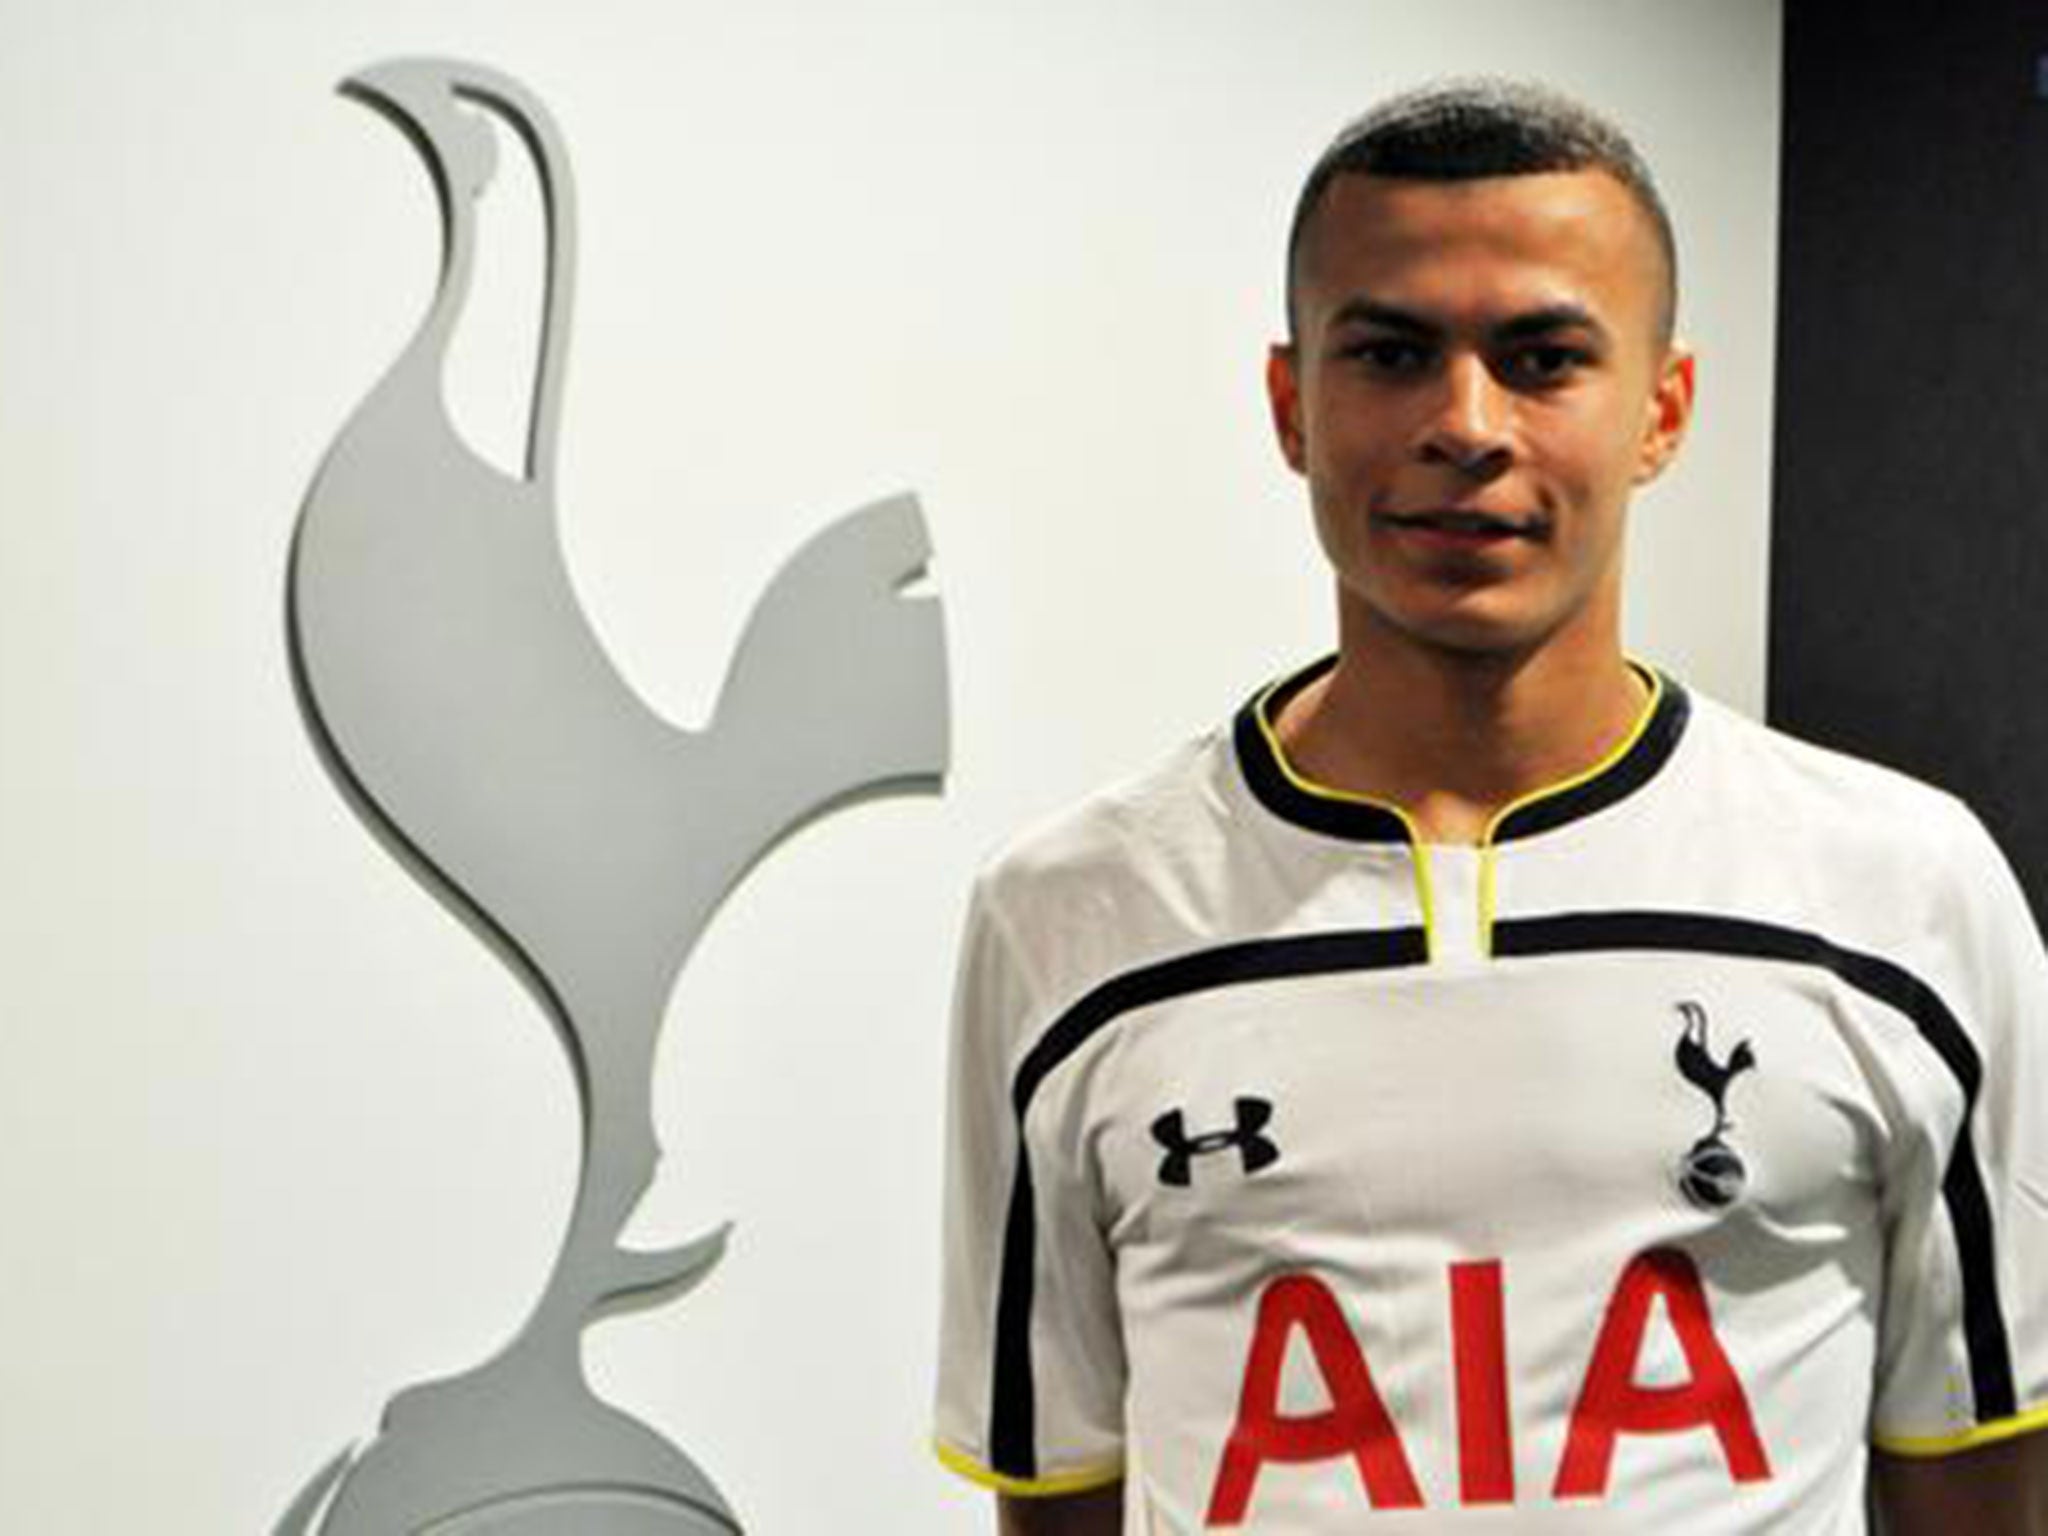 Tottenham announce the signing of 18-year-old Dele Alli